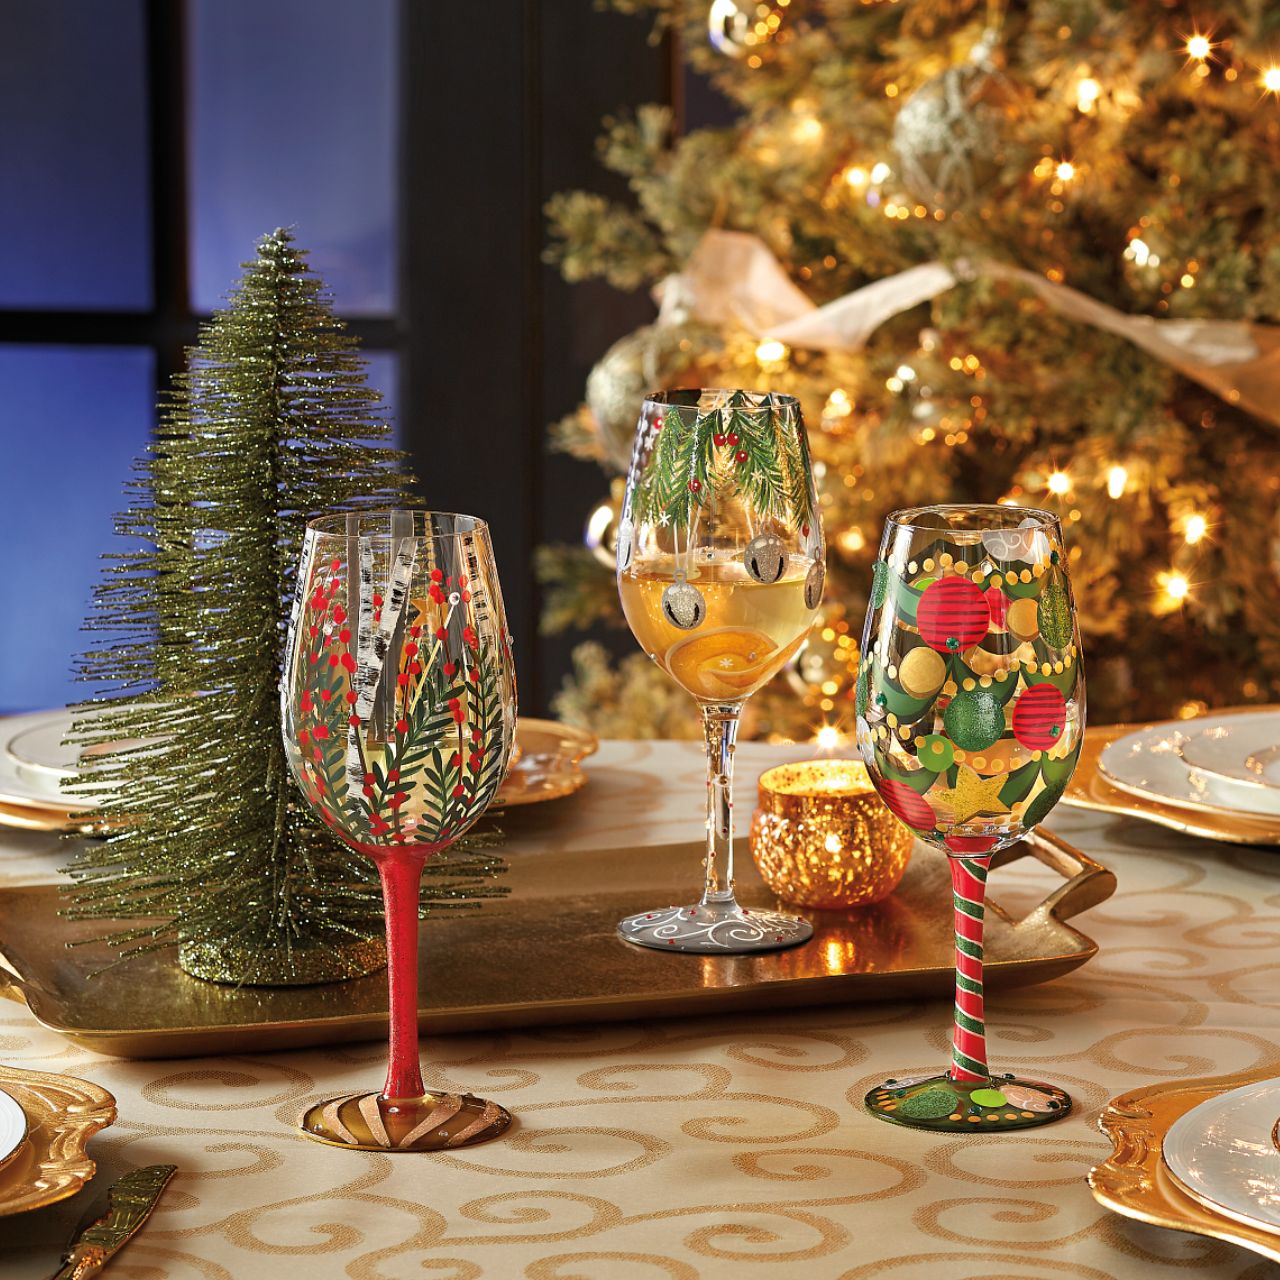 Visions of Christmas Birch Wine Glass by Lolita   Take a Christmas walk with our Visions of Birch Wine Glass by Lolita. Surrounded by beautifully decorated Christmas branches, a full red glittered stem and a gold Christmas bauble on the bottom of the glass this wine glass radiates Christmas all year round.